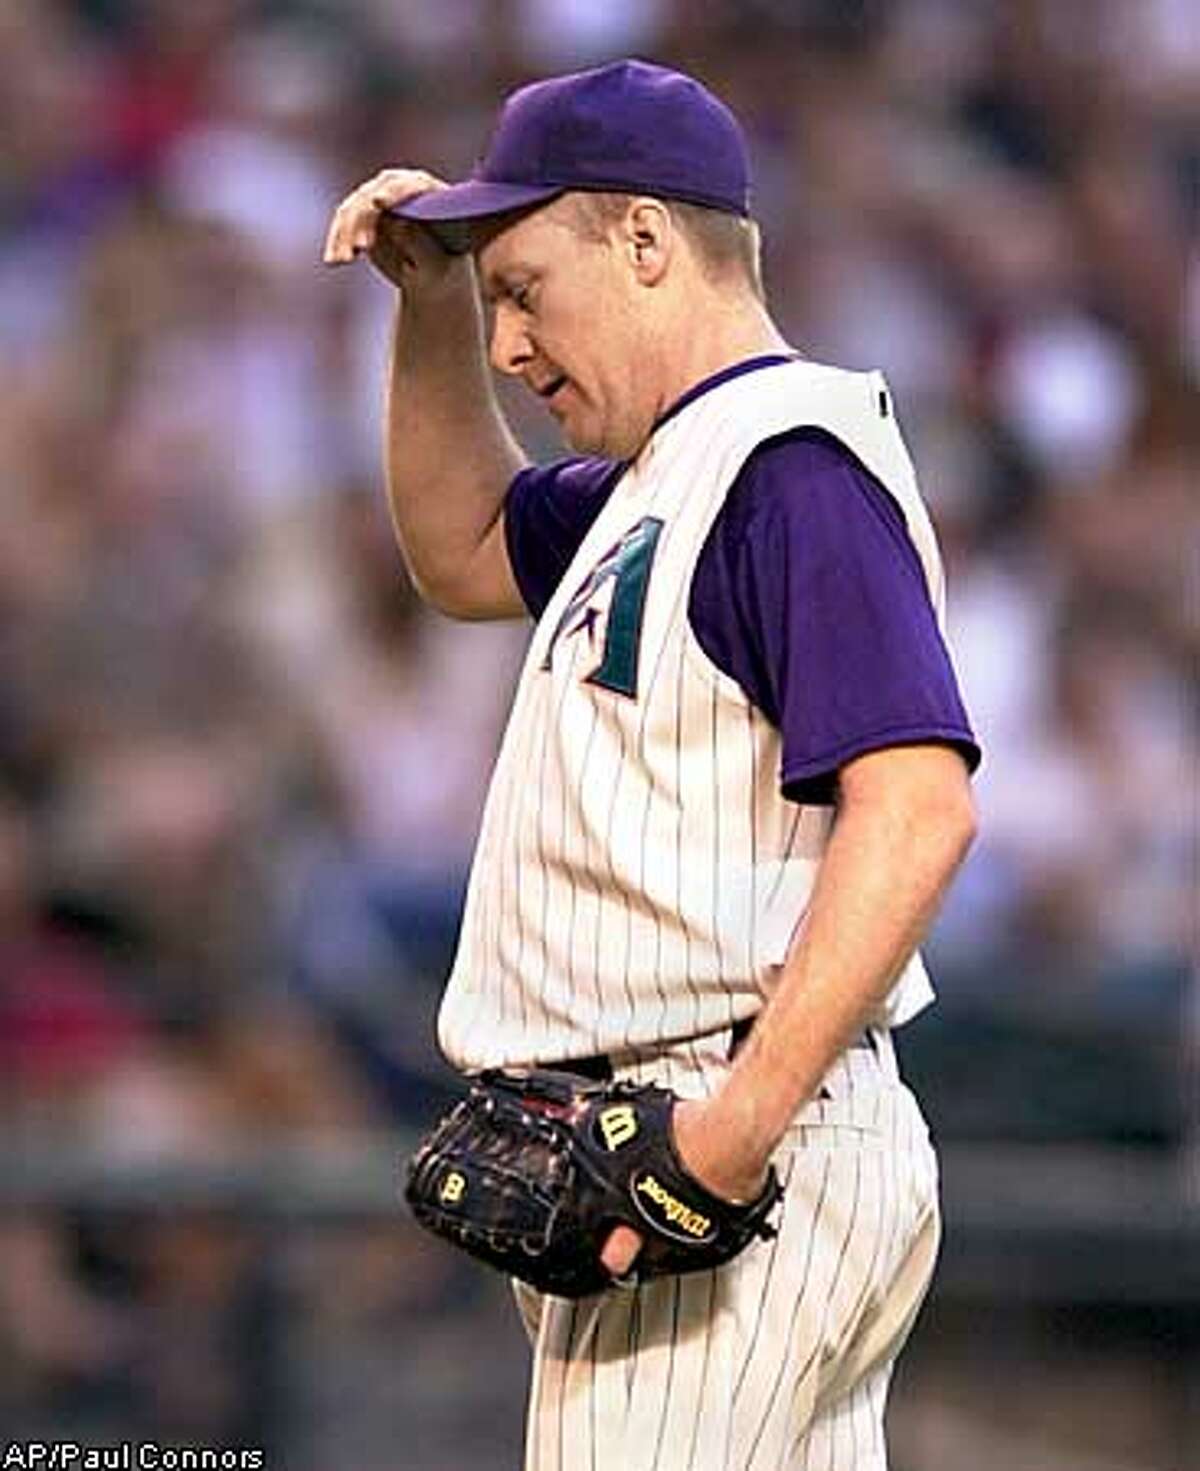 Arizona Diamondbacks pitcher Curt Schilling reacts after giving up a homerun to San Francisco Giants batter J.T. Snow in the second inning Monday, May 19, 2003, in Phoenix. Schilling gave up two homeruns in the inning.(AP Photo/Paul Connors)